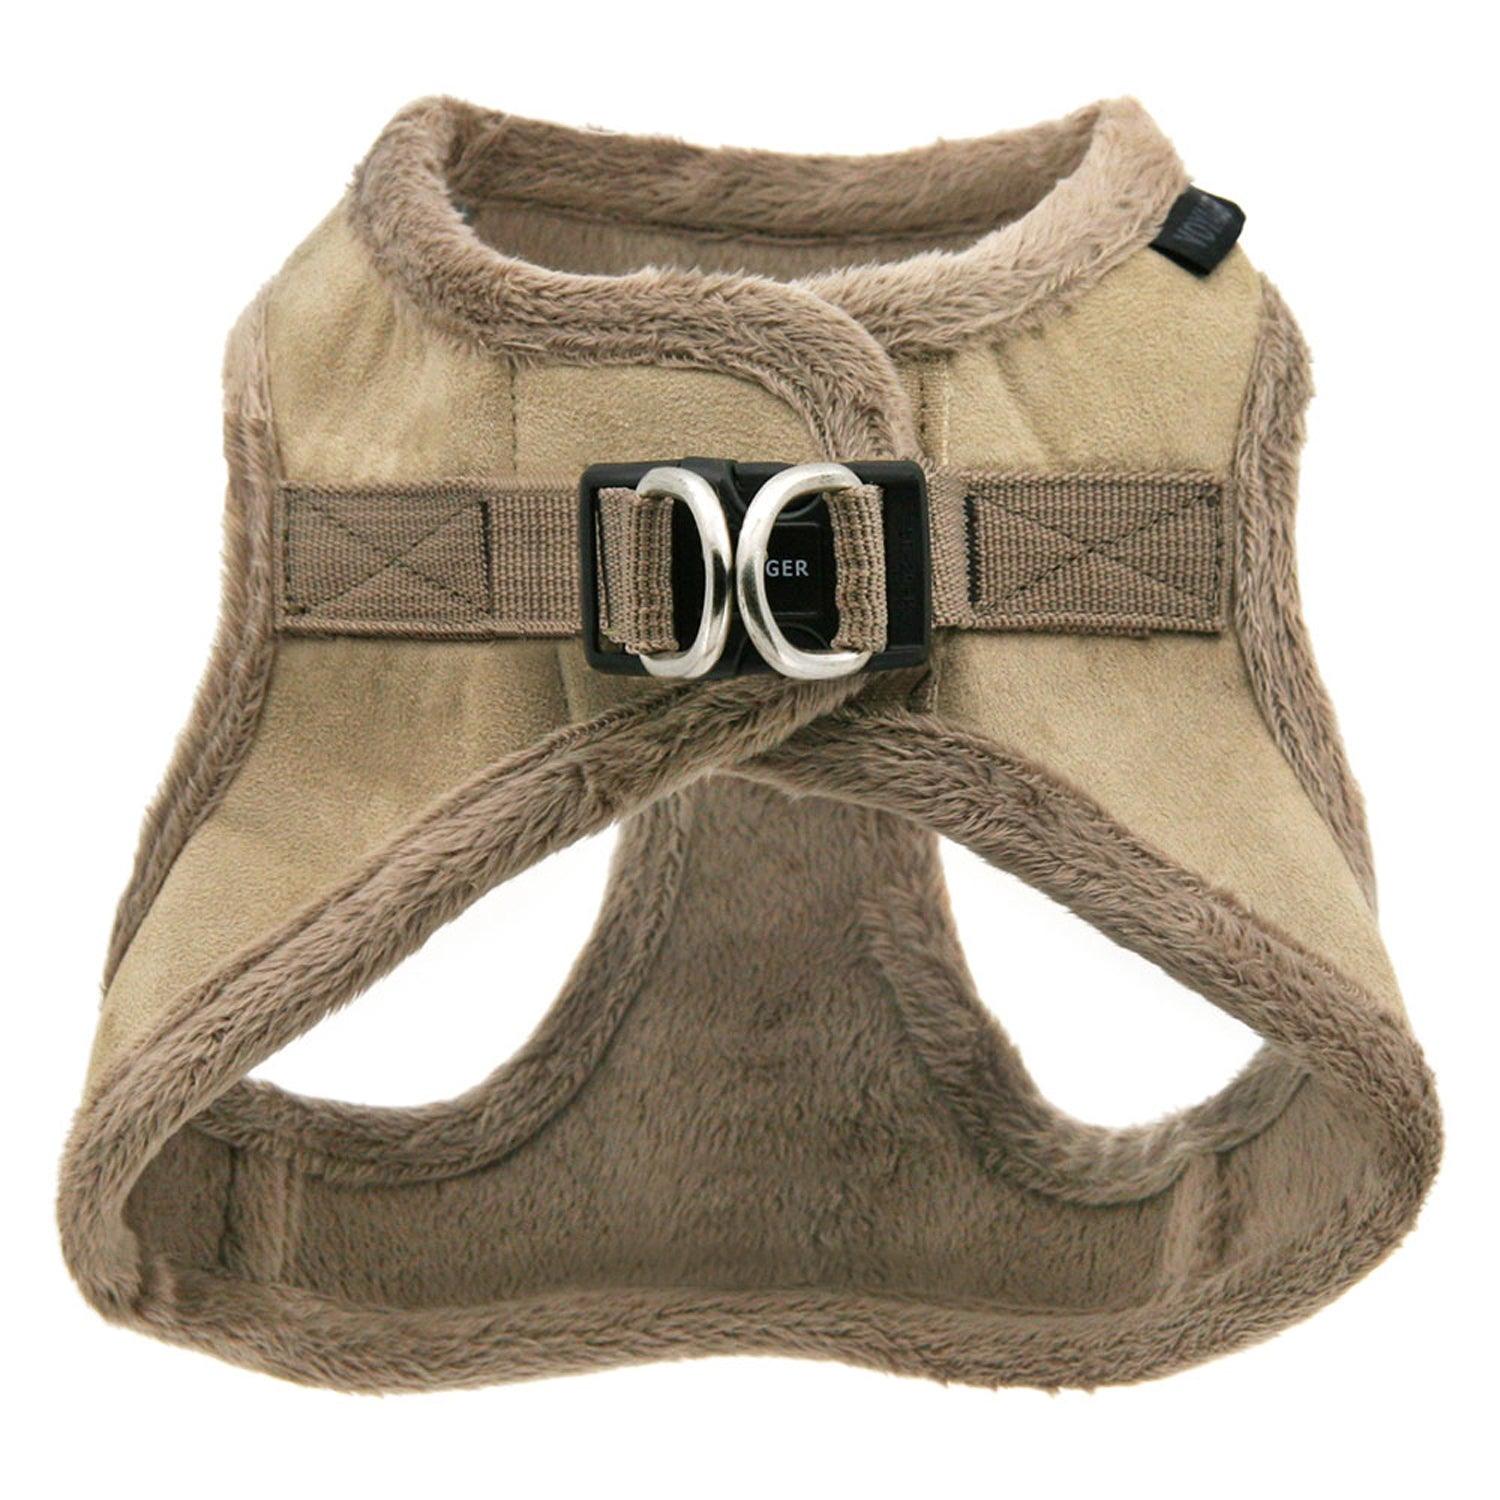 Step-In Plush Pet Harness - VOYAGER Dog Harnesses